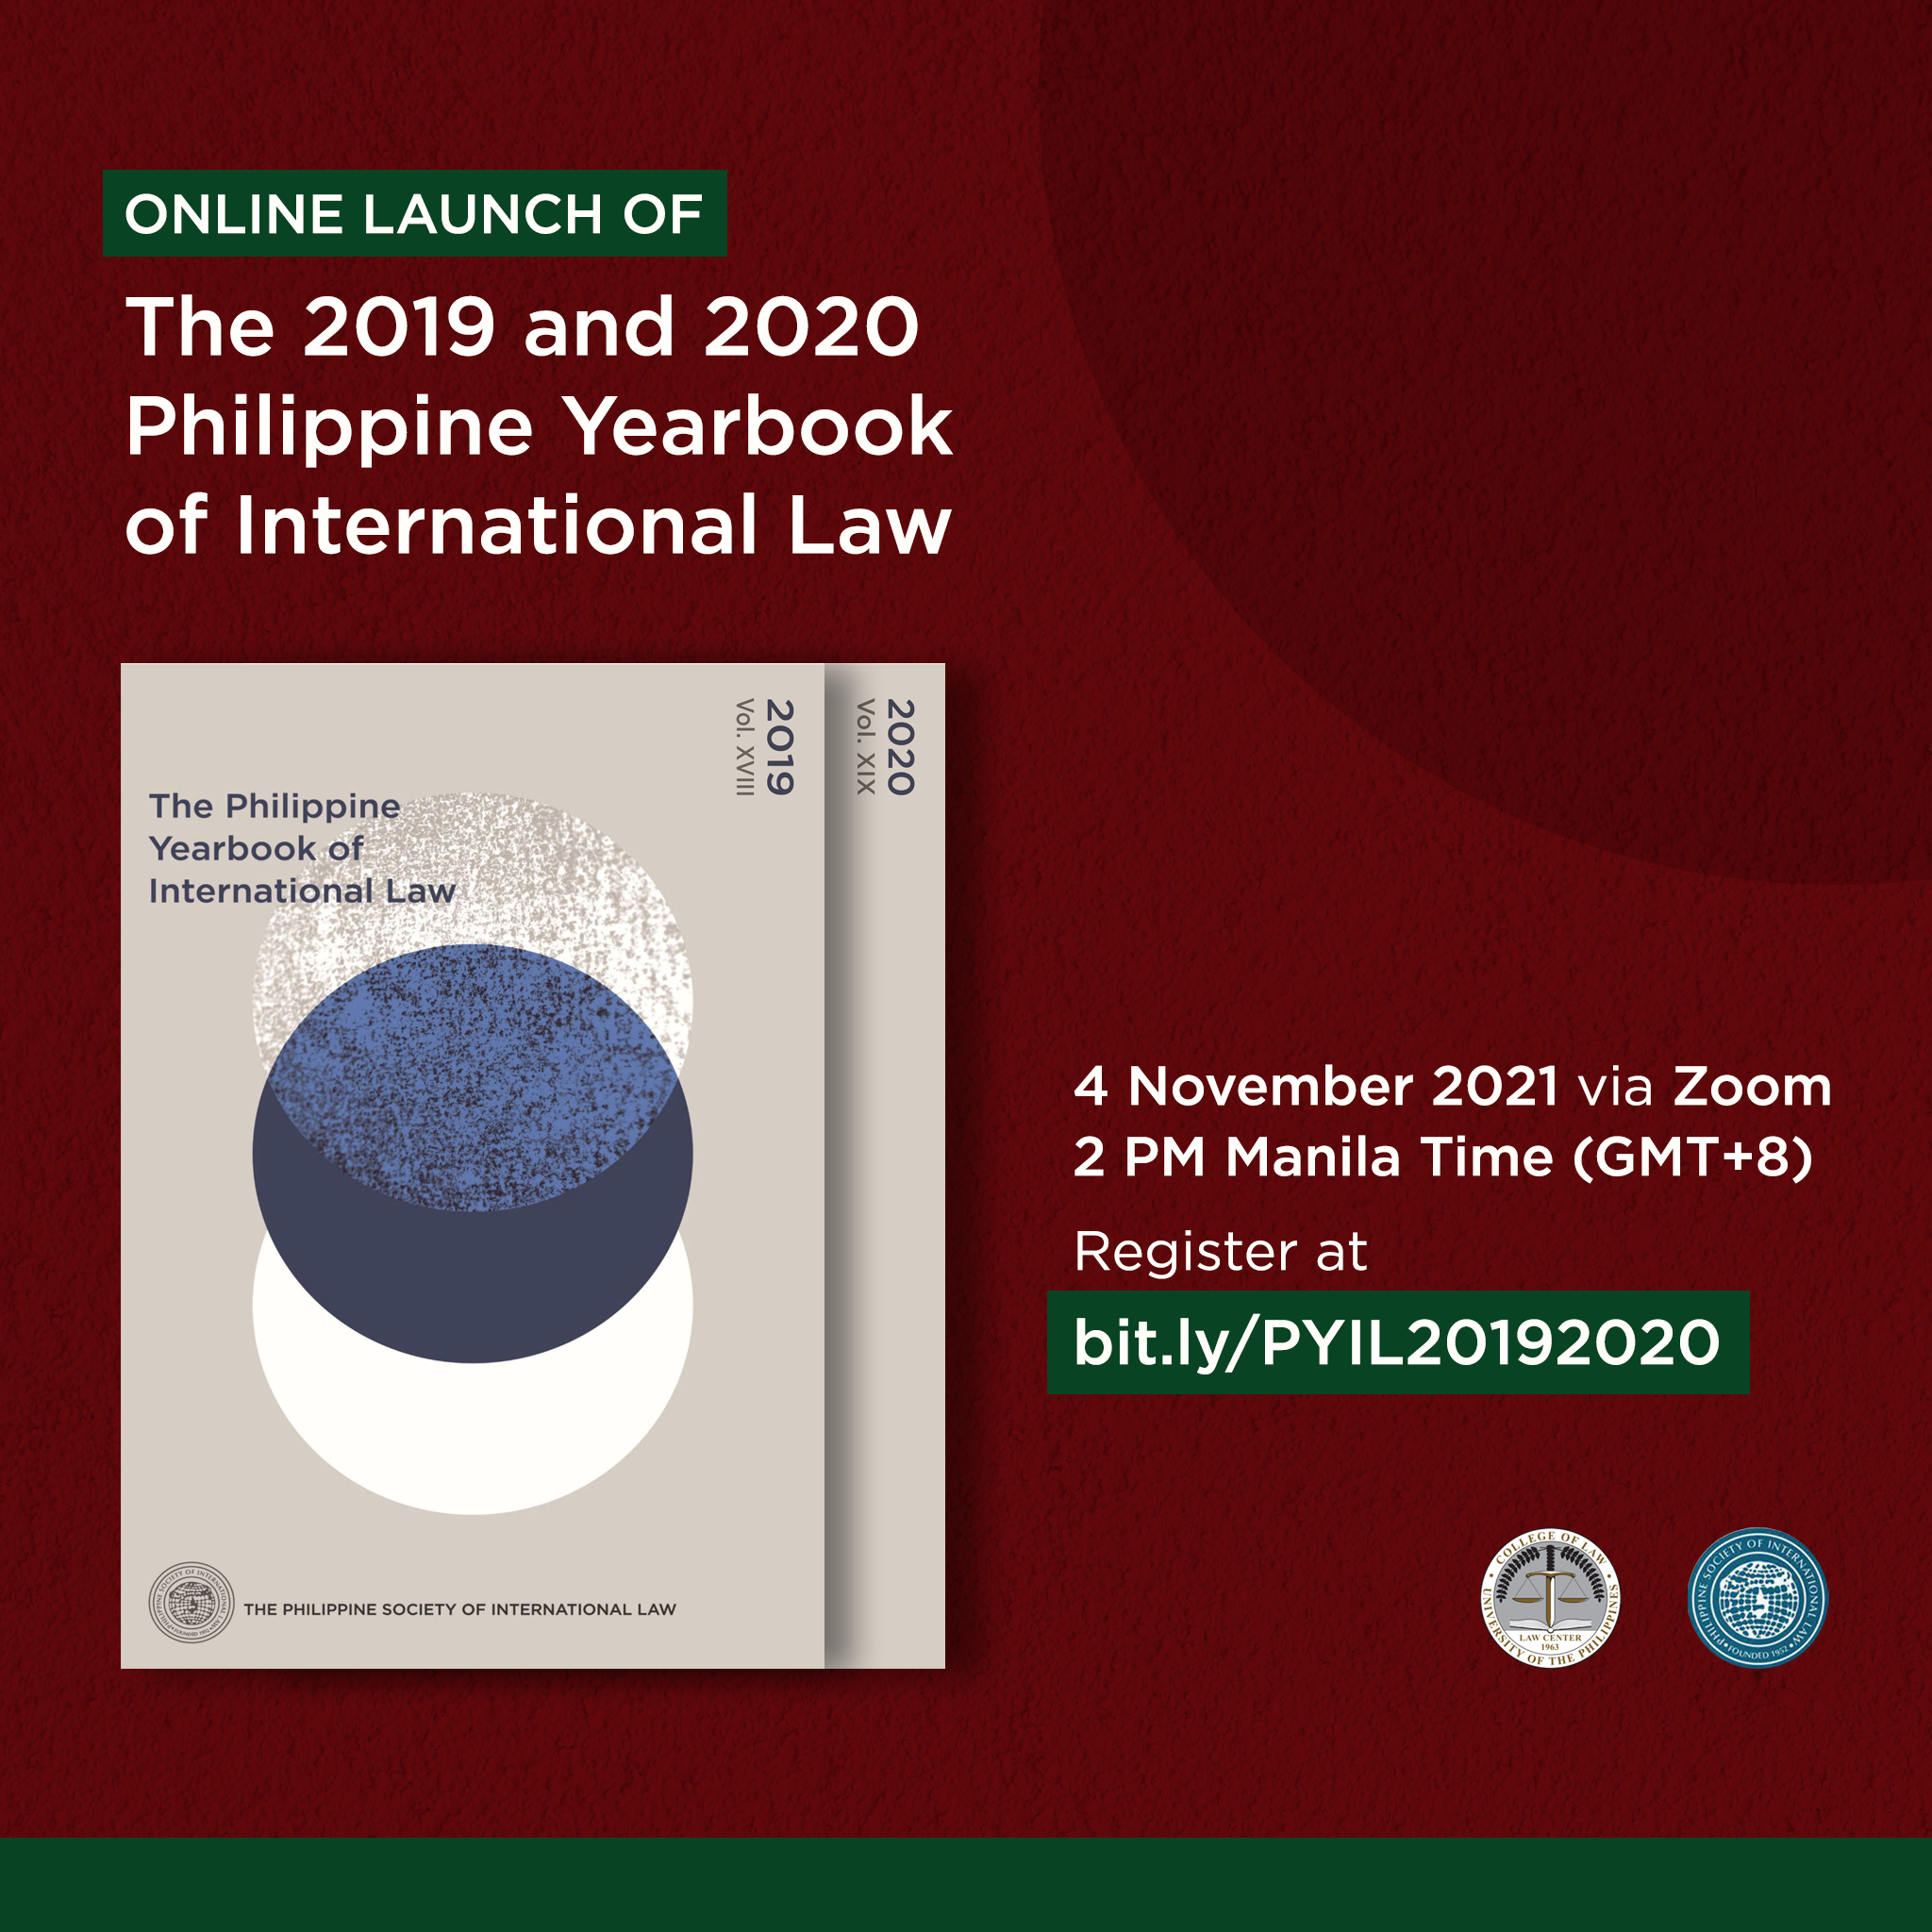 Online Launch of the 2019 and 2020 Philippine Yearbook of International Law